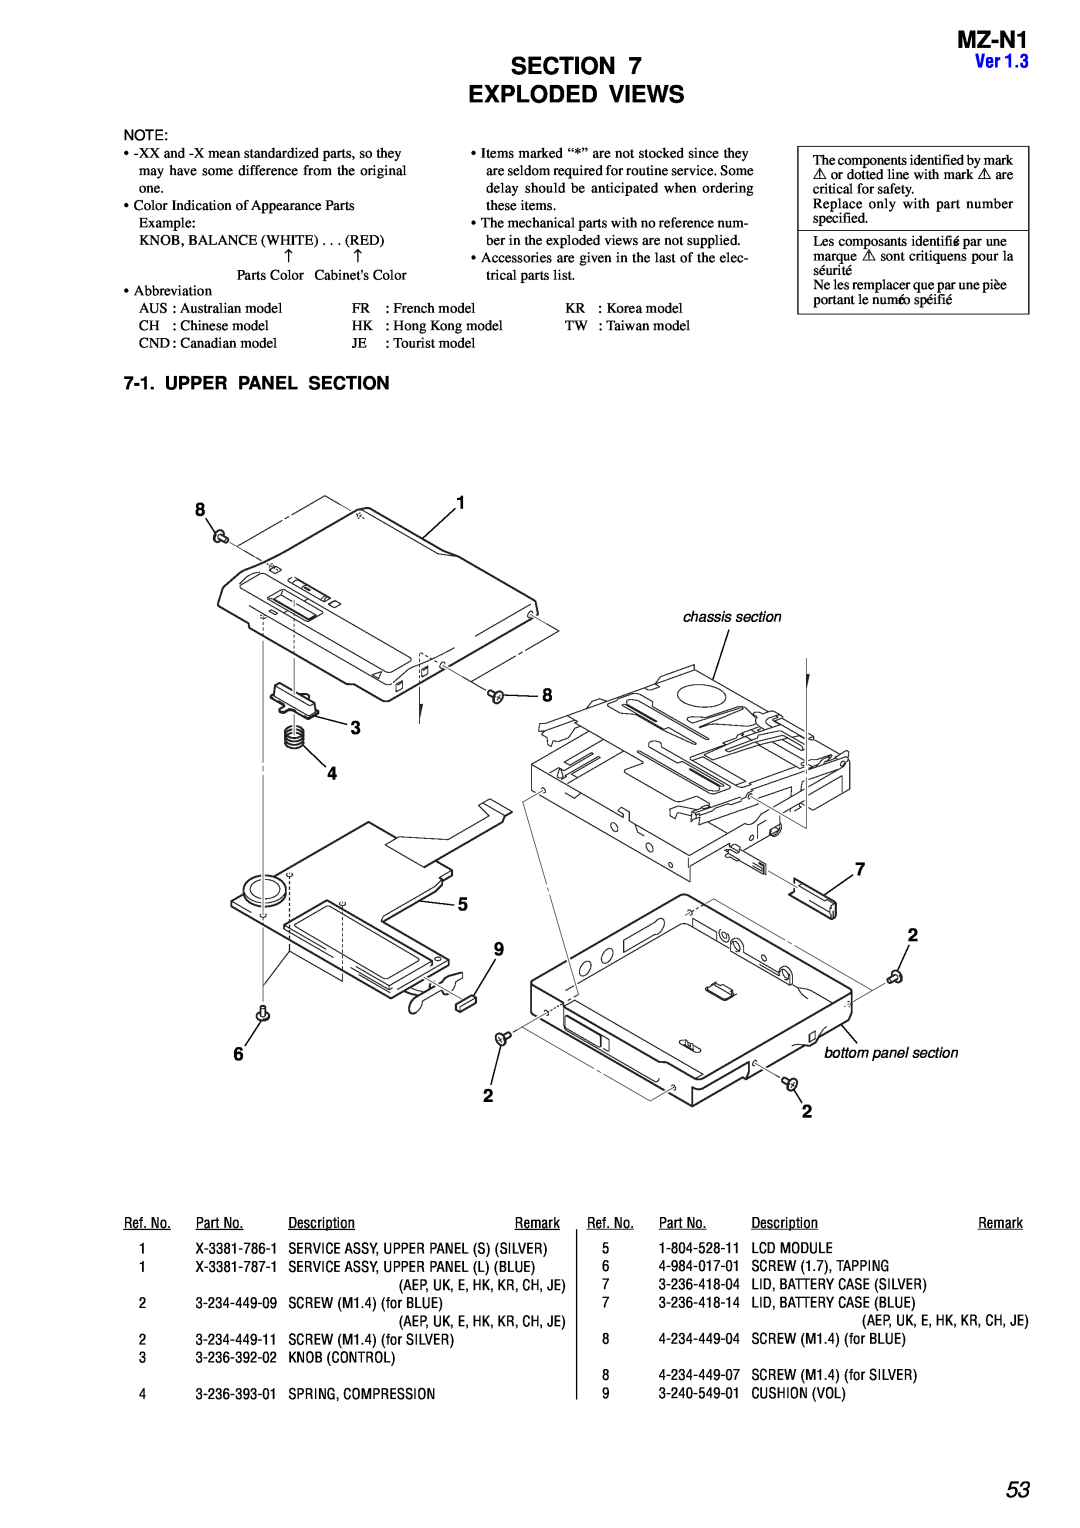 Sony MZ-N1 service manual Exploded Views, Upper Panel Section, 8 3 4 5 